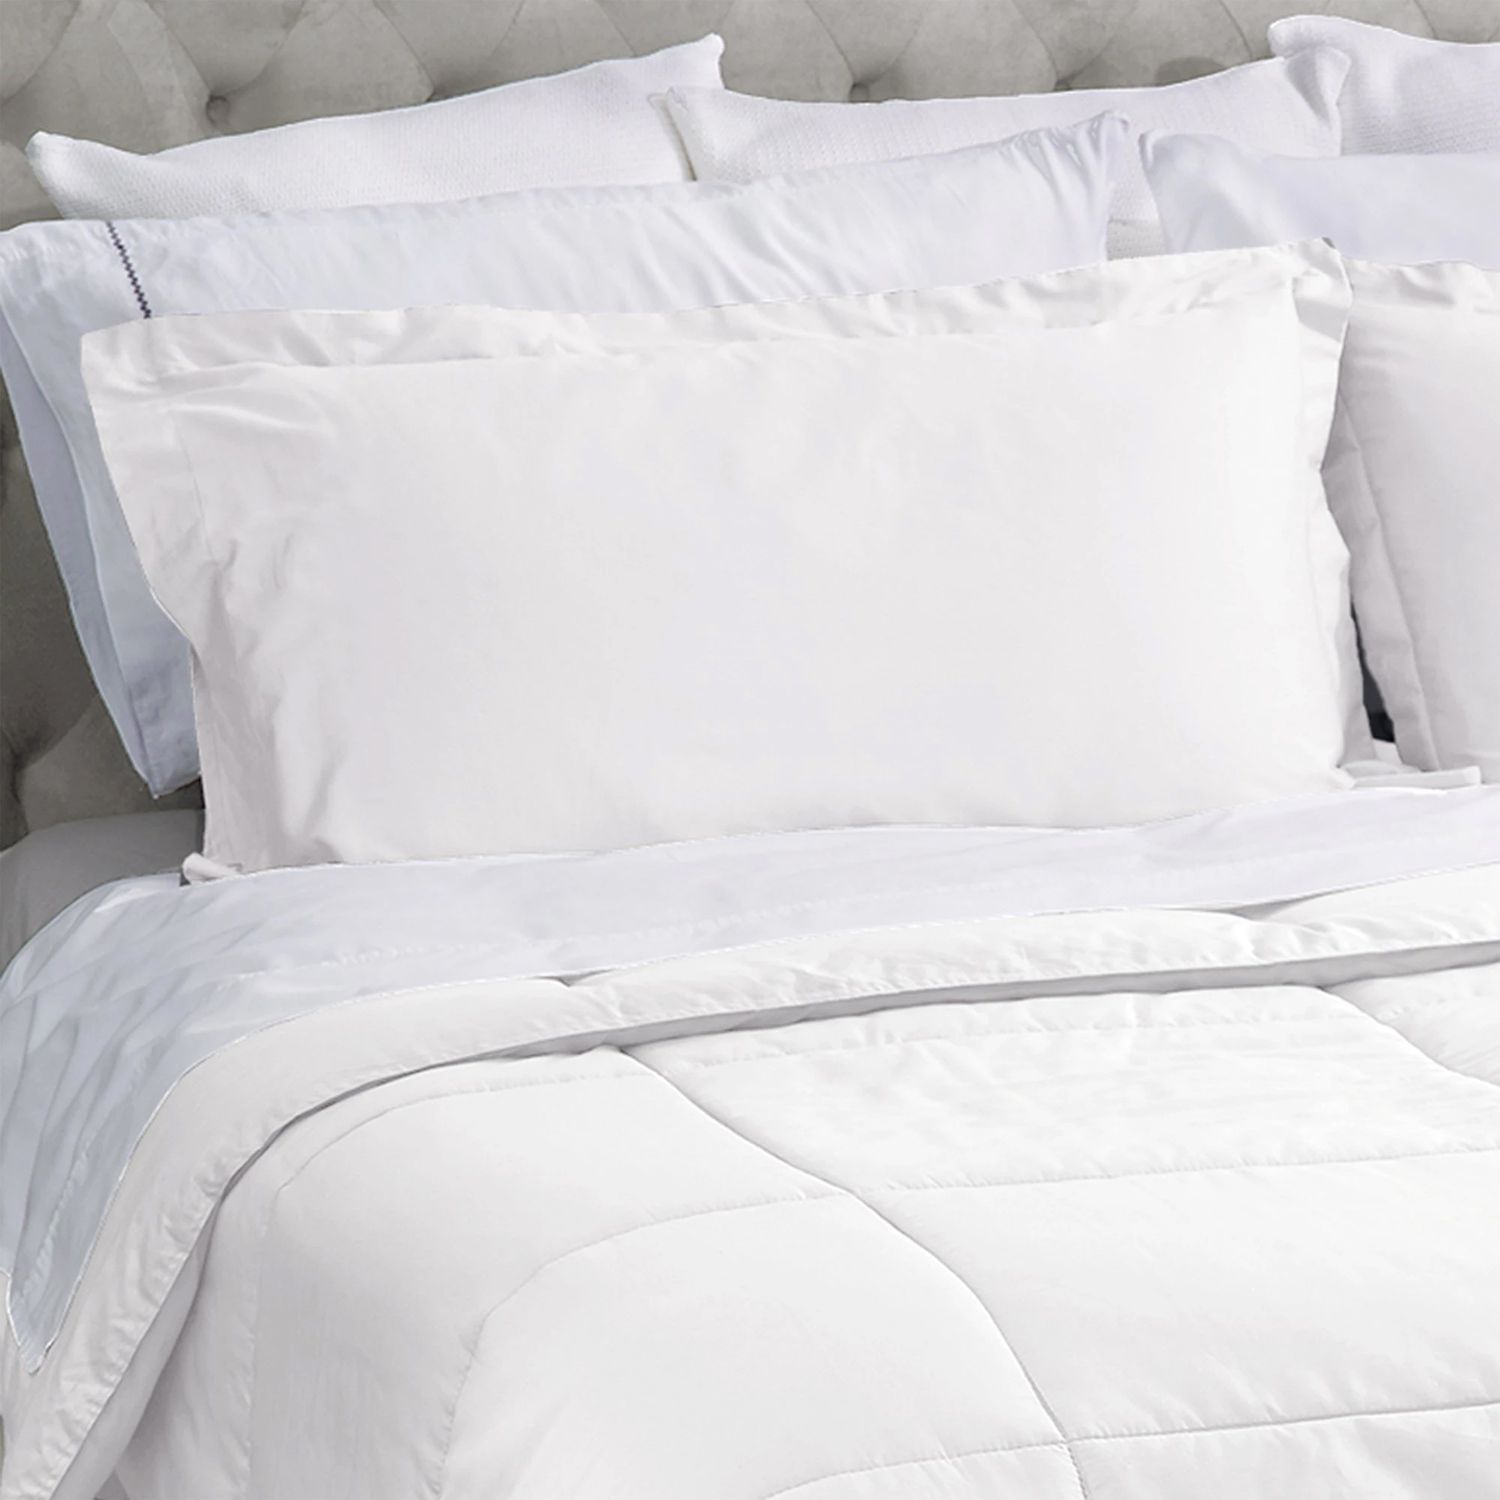 covermade bedding on bed in white